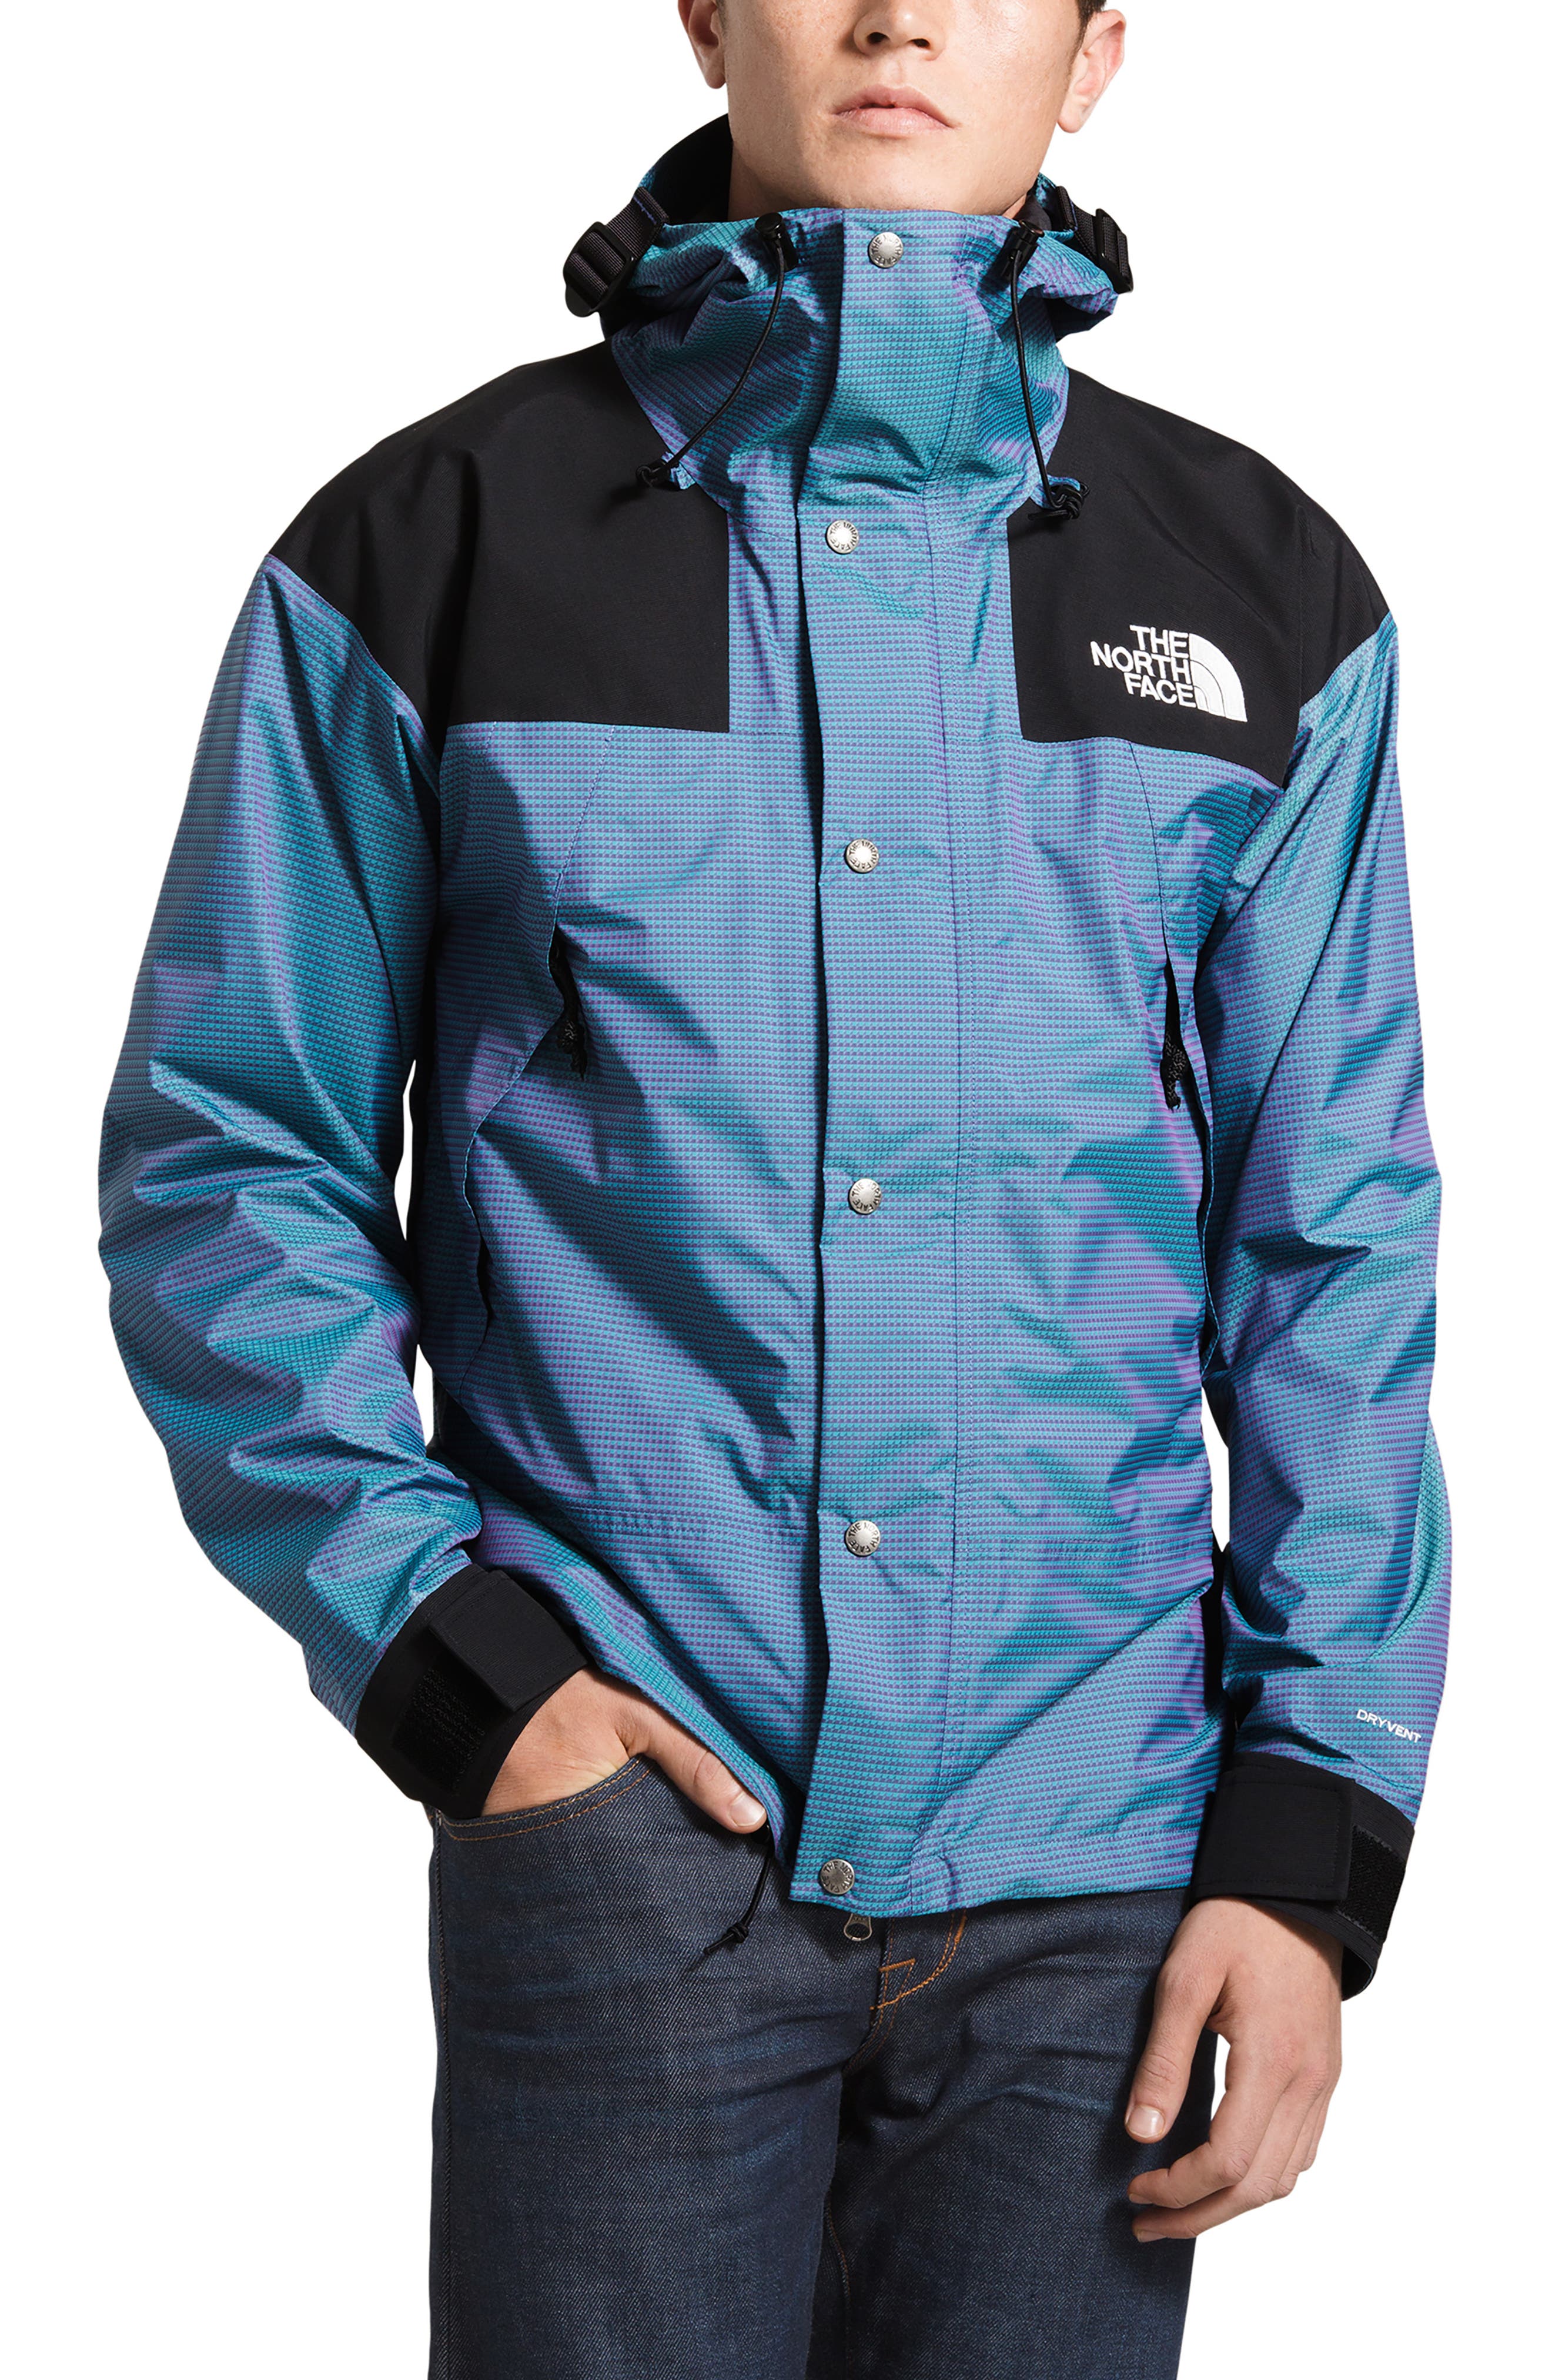 north face 1990 mountain jacket blue